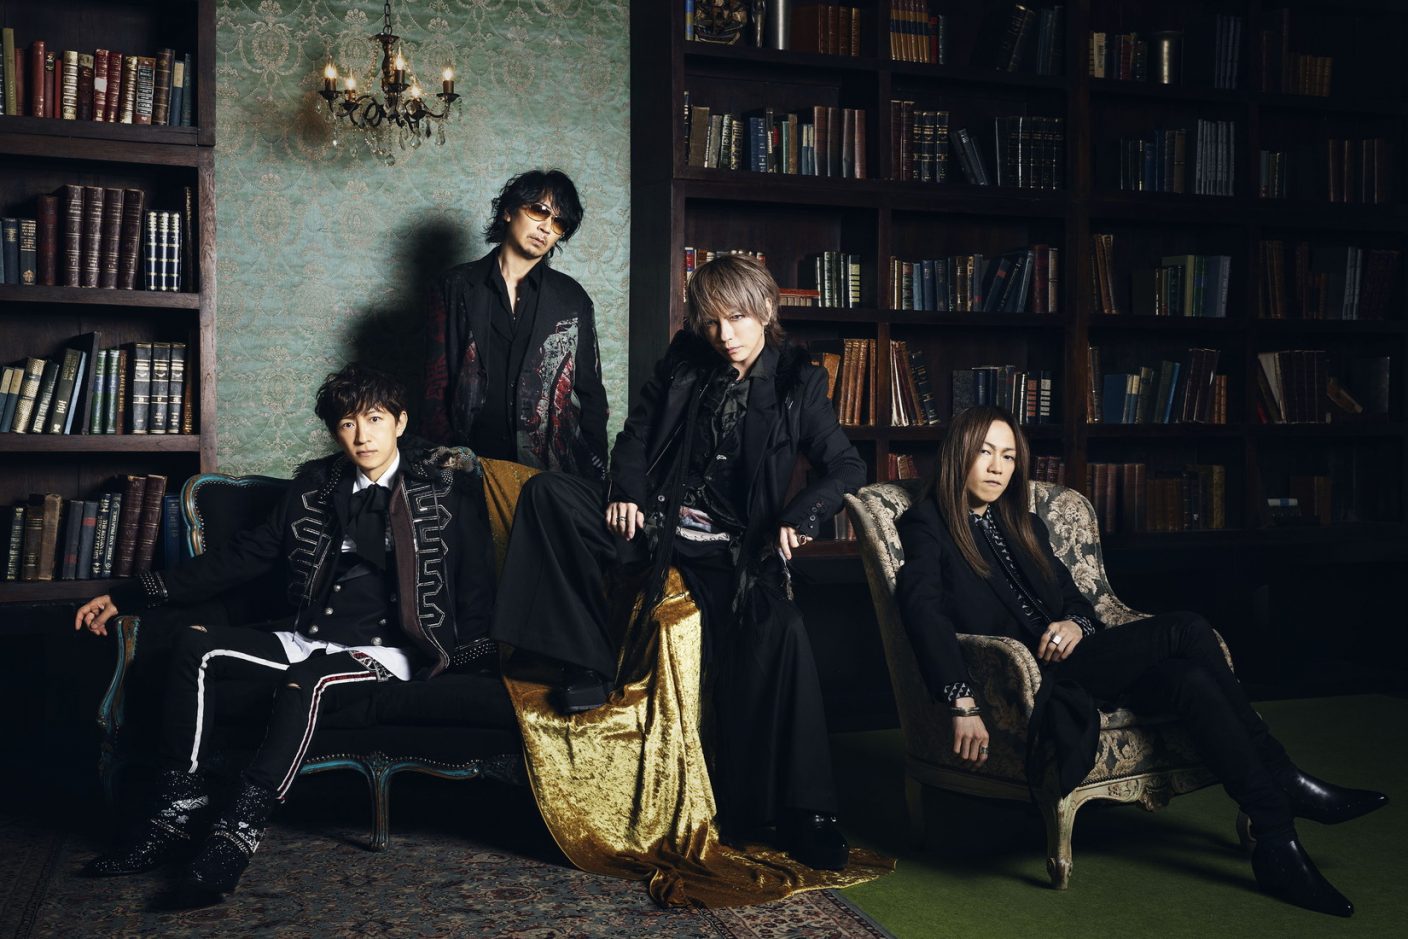 L Arc En Ciel 新曲 Forever のフルバージョンを配信リリース決定 The First Times